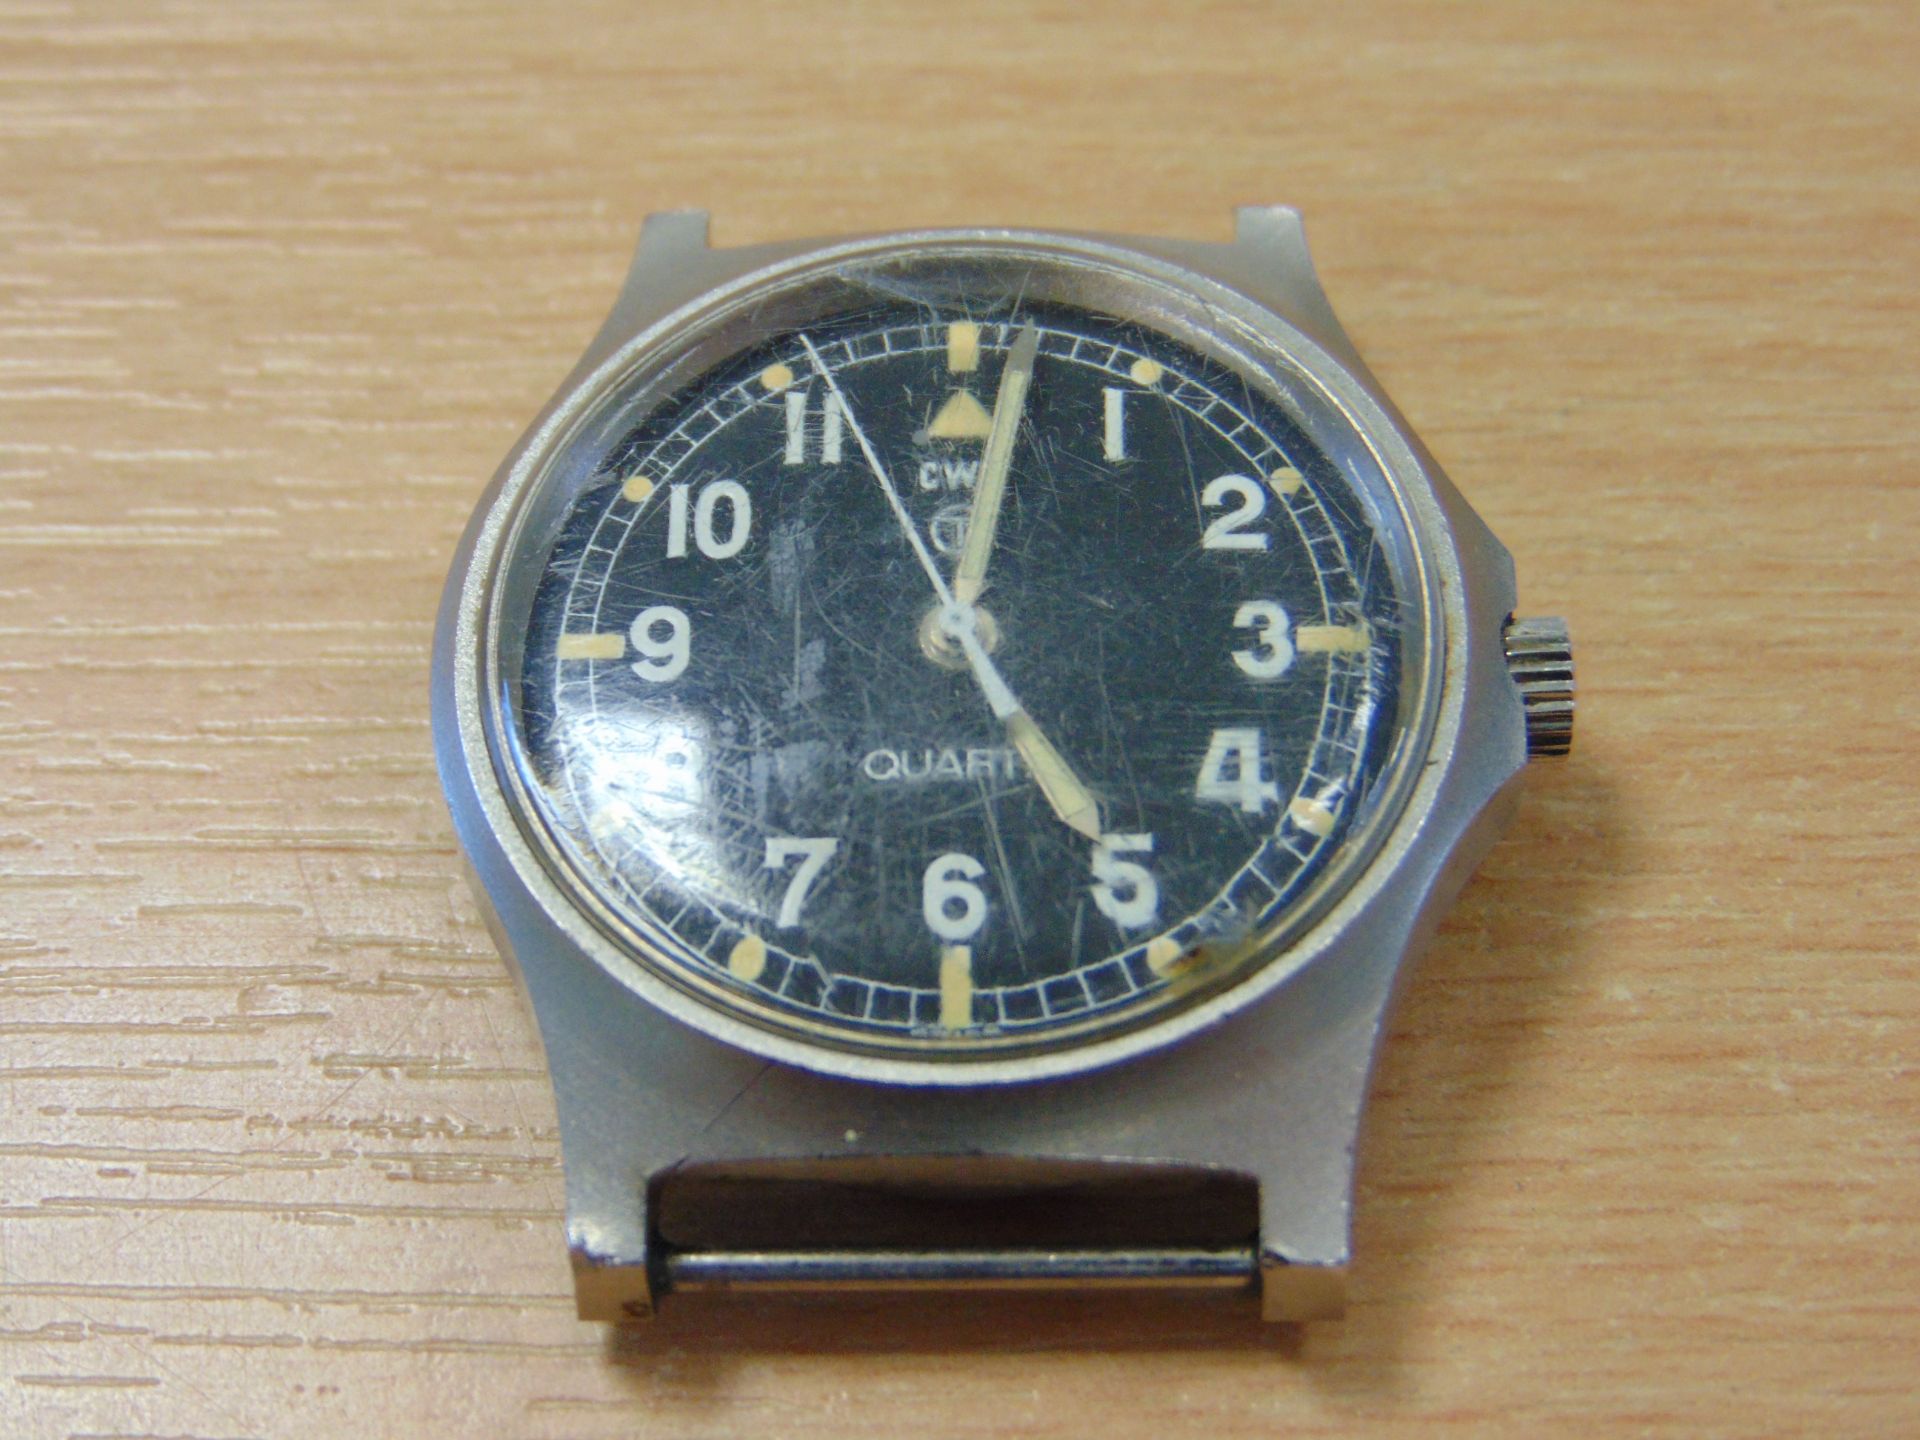 Very Rare CWC G10 British Army Fat Boy Service Watch Date 1980 - Image 3 of 4